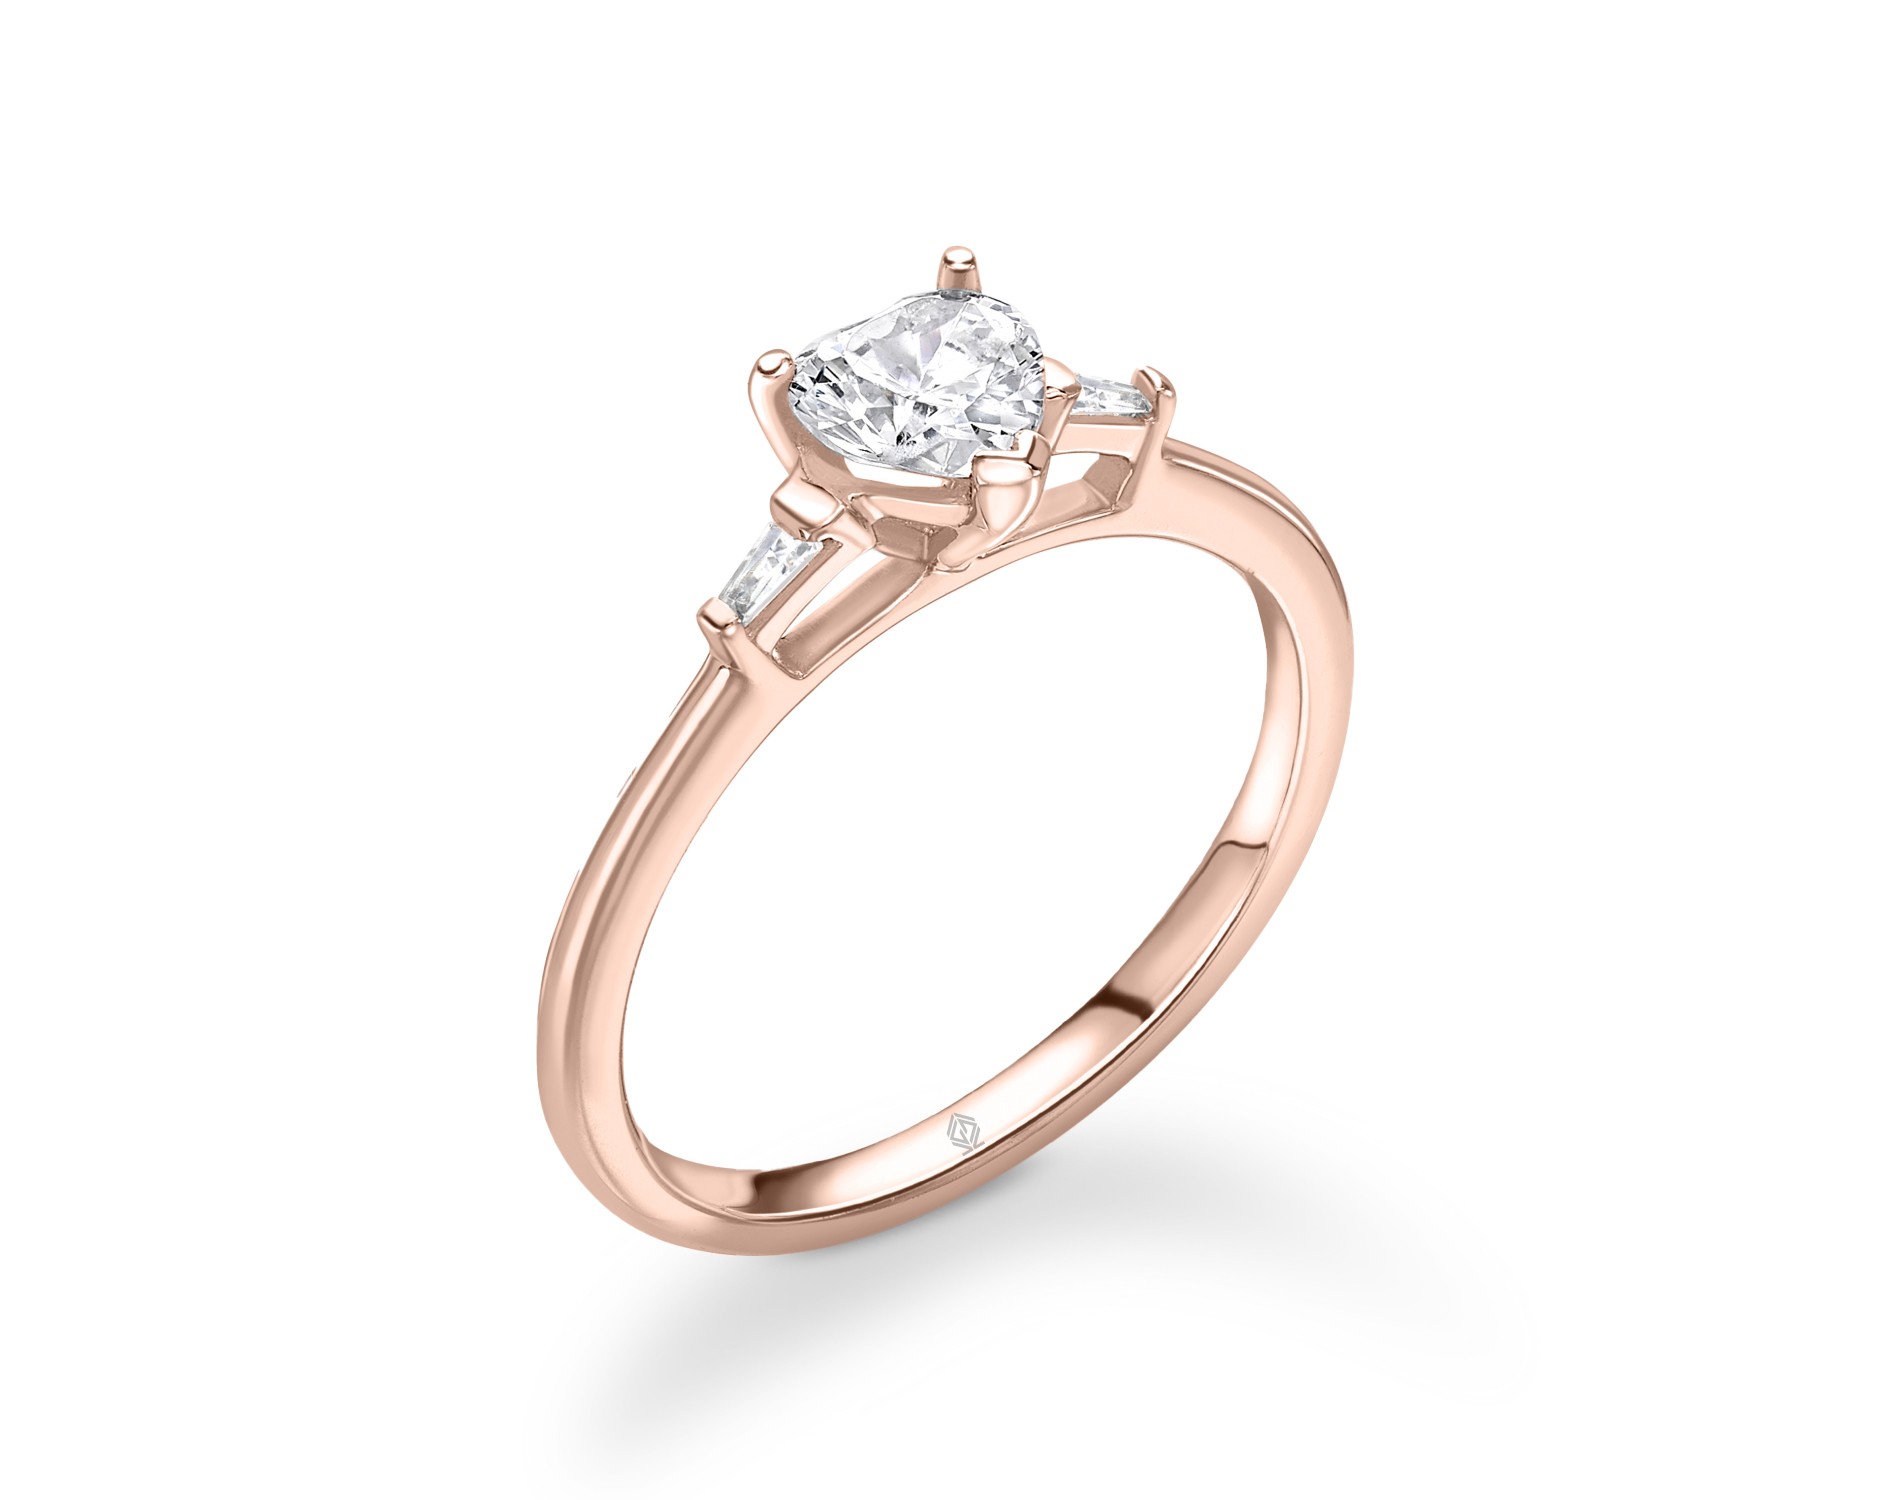 18K ROSE GOLD HEART CUT DIAMOND ENGAGEMENT RING WITH BAGUETTES CUT SIDE STONES